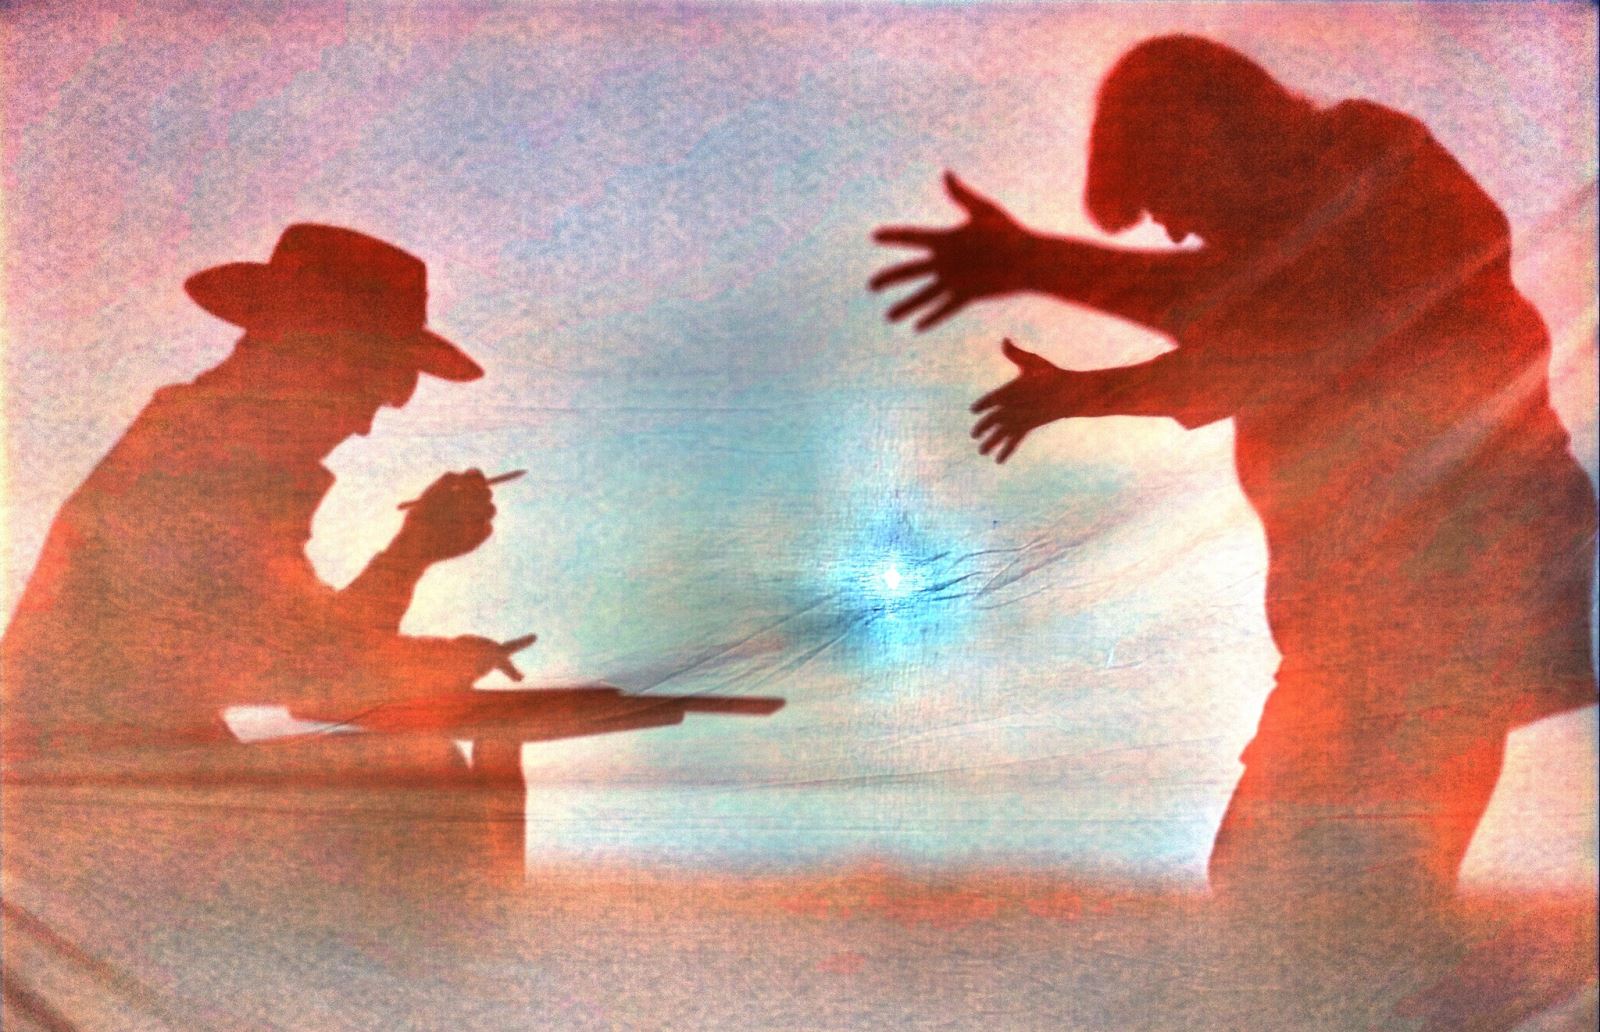 shadows of two men, one with a cowboy hat holding a pencil sitting at a table and the other with a pompadour haircut dancing